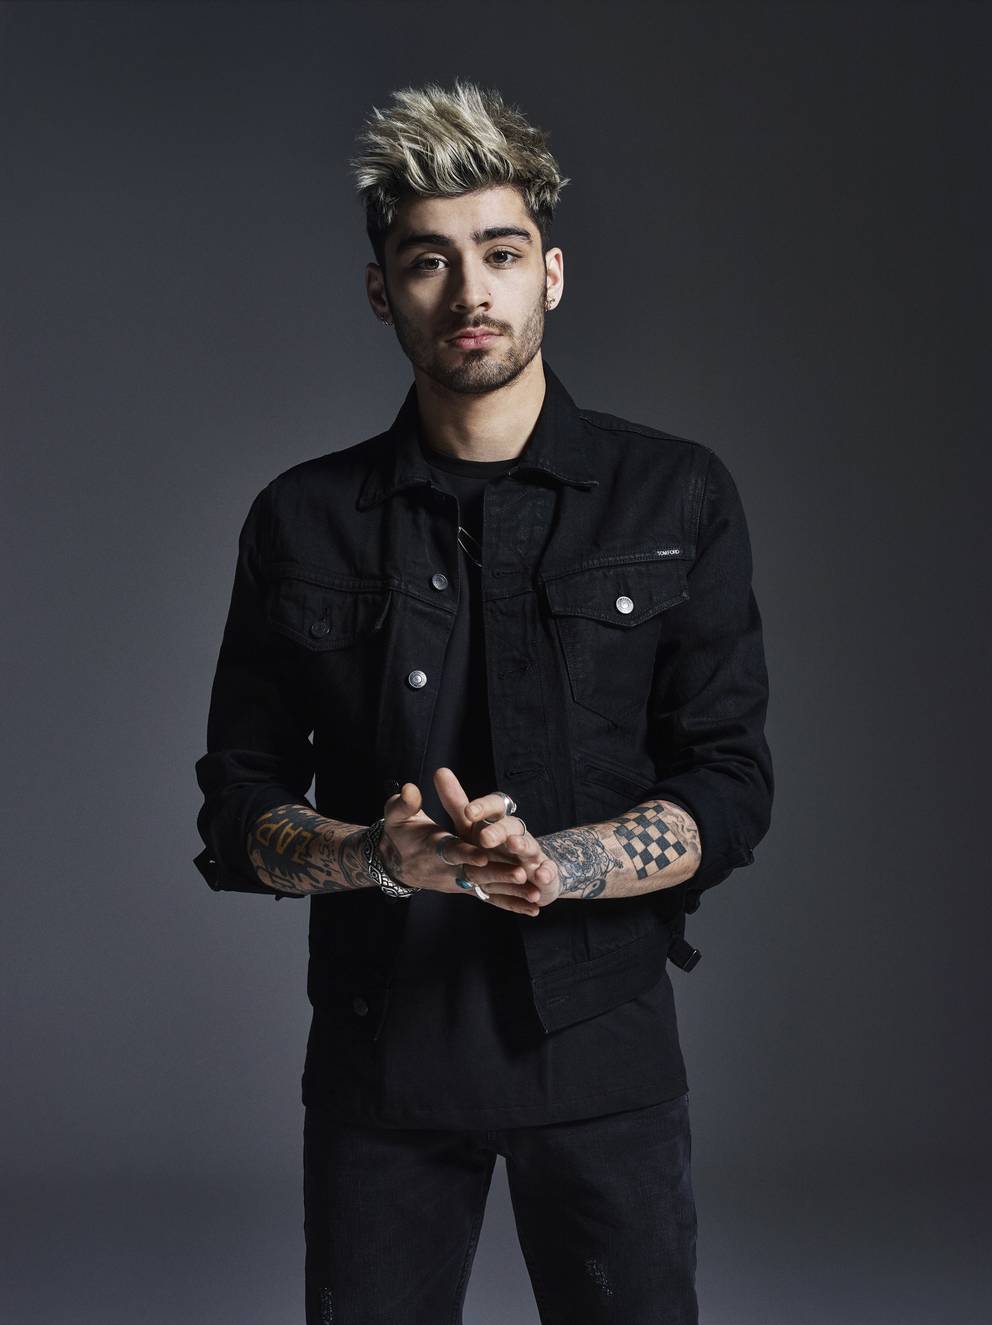 Zayn Malik Has Revealed He Struggled With An Eating Disorder While With 